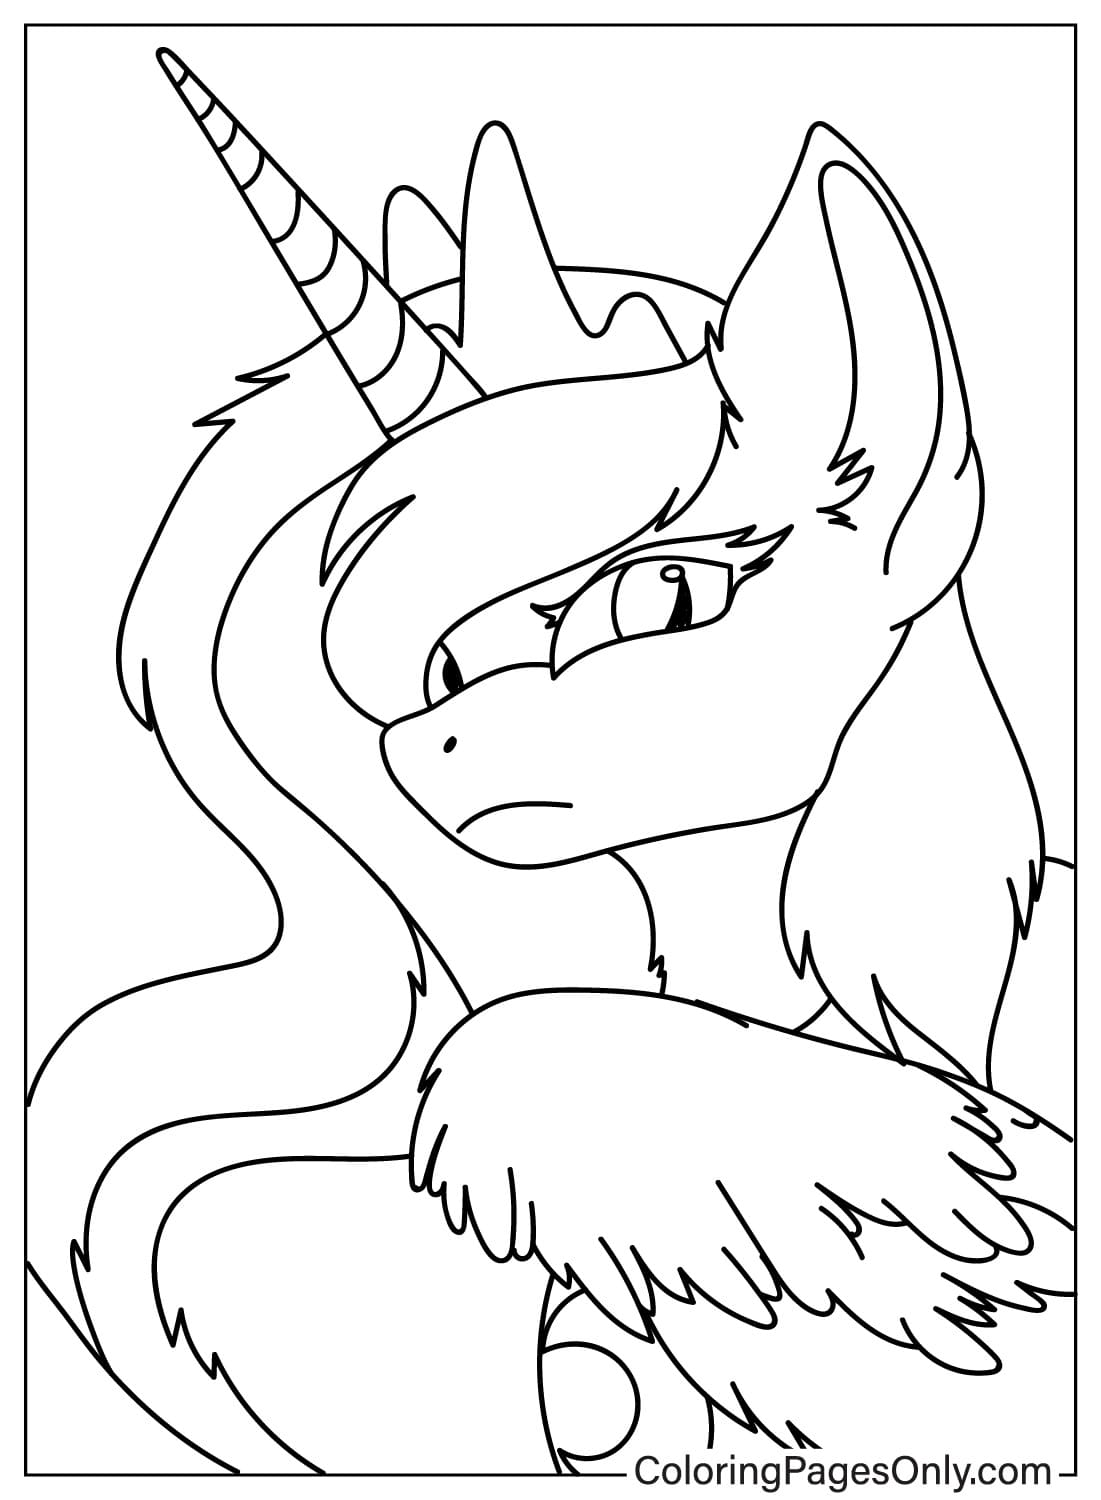 Princess Luna Coloring Page from My Little Pony